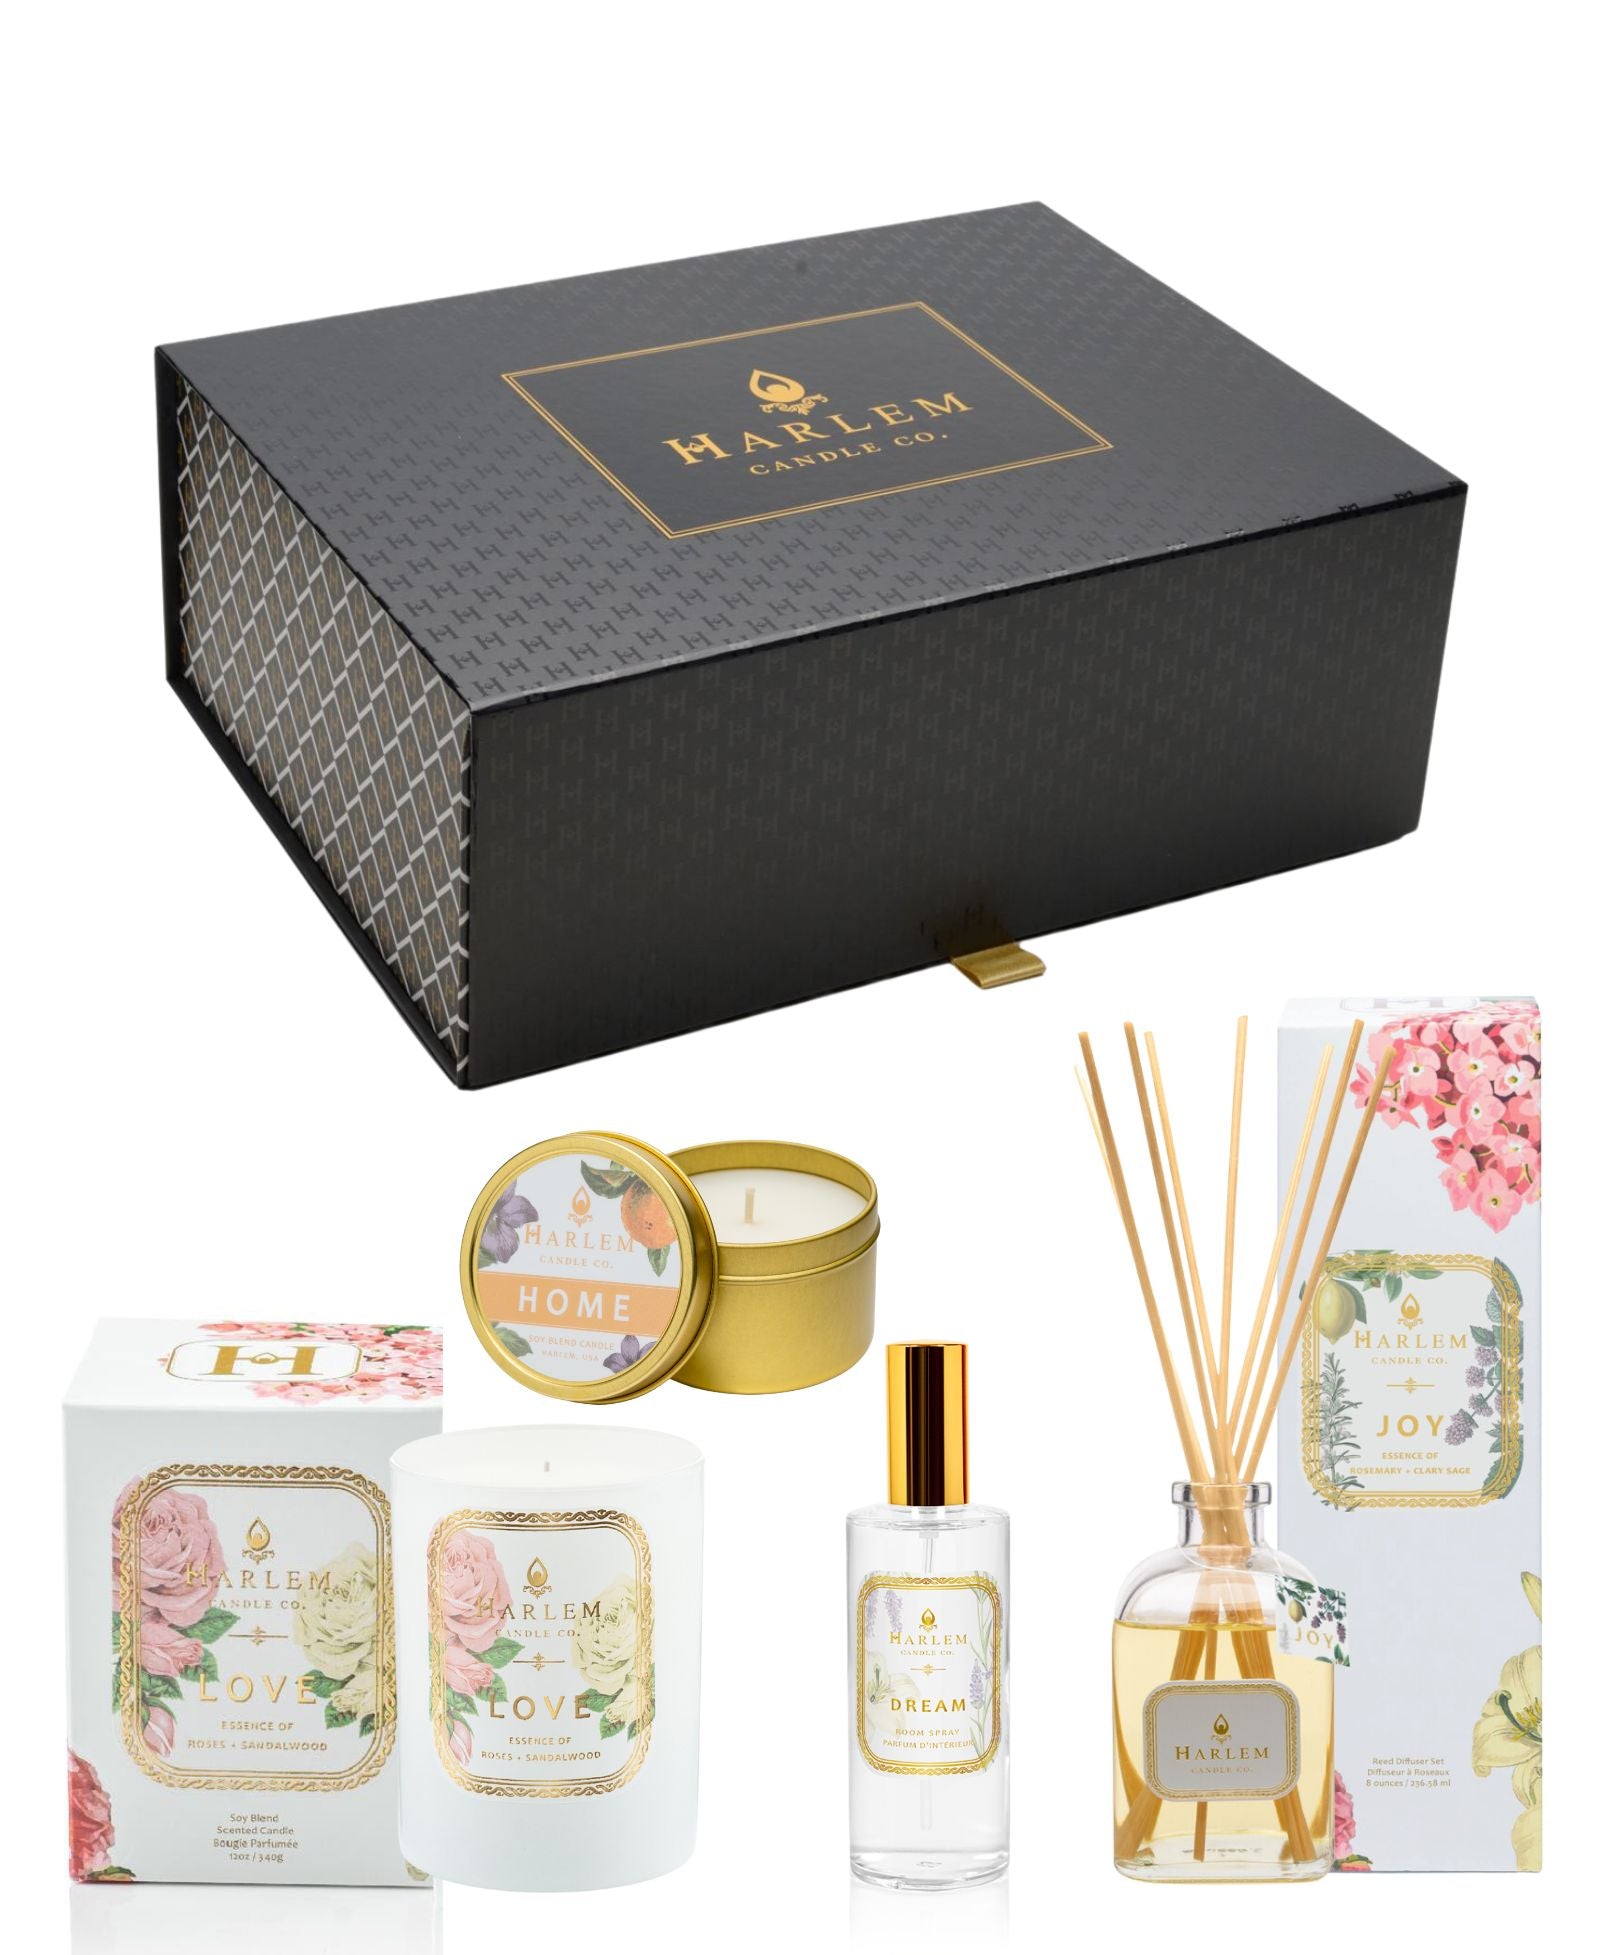 This is an image of our Ultimate Mother's Day Gift Box which includes the 11 oz Love candle, the Home travel candle, the Dream room spray and the Joy reed diffuser.  It come packaged in our luxury gift box.